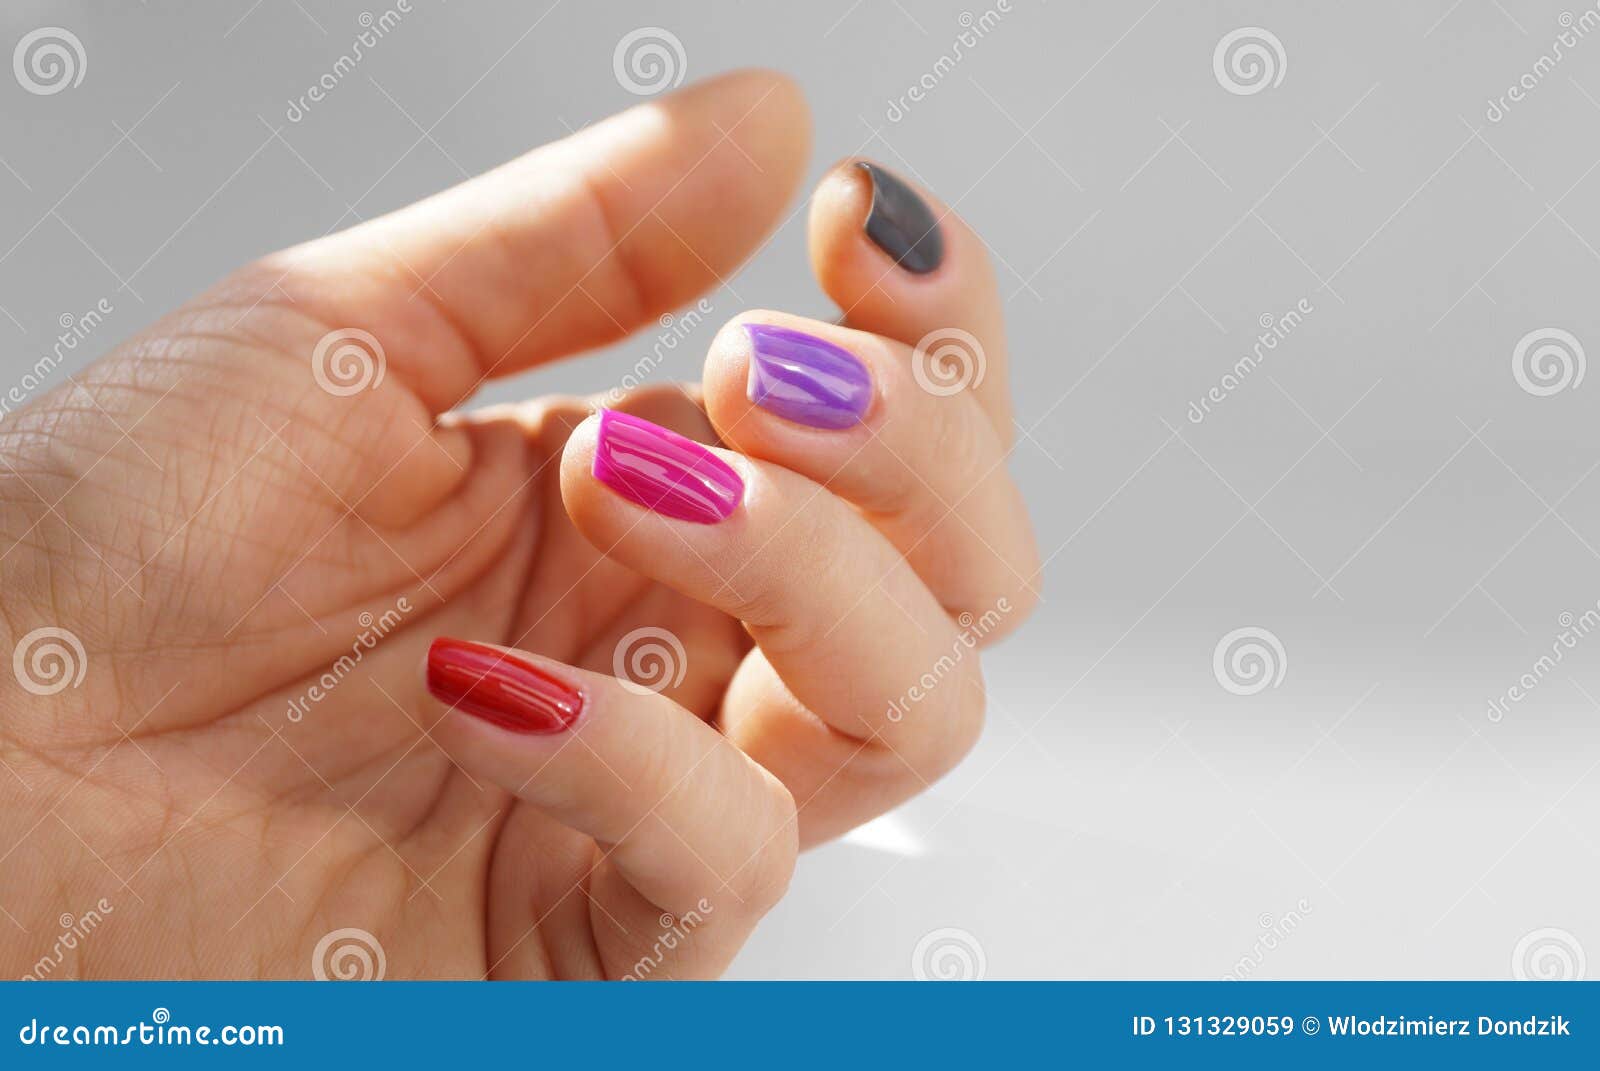 Different Colors of Nail Polish. Feminine Hand with Painted Nails, Each ...